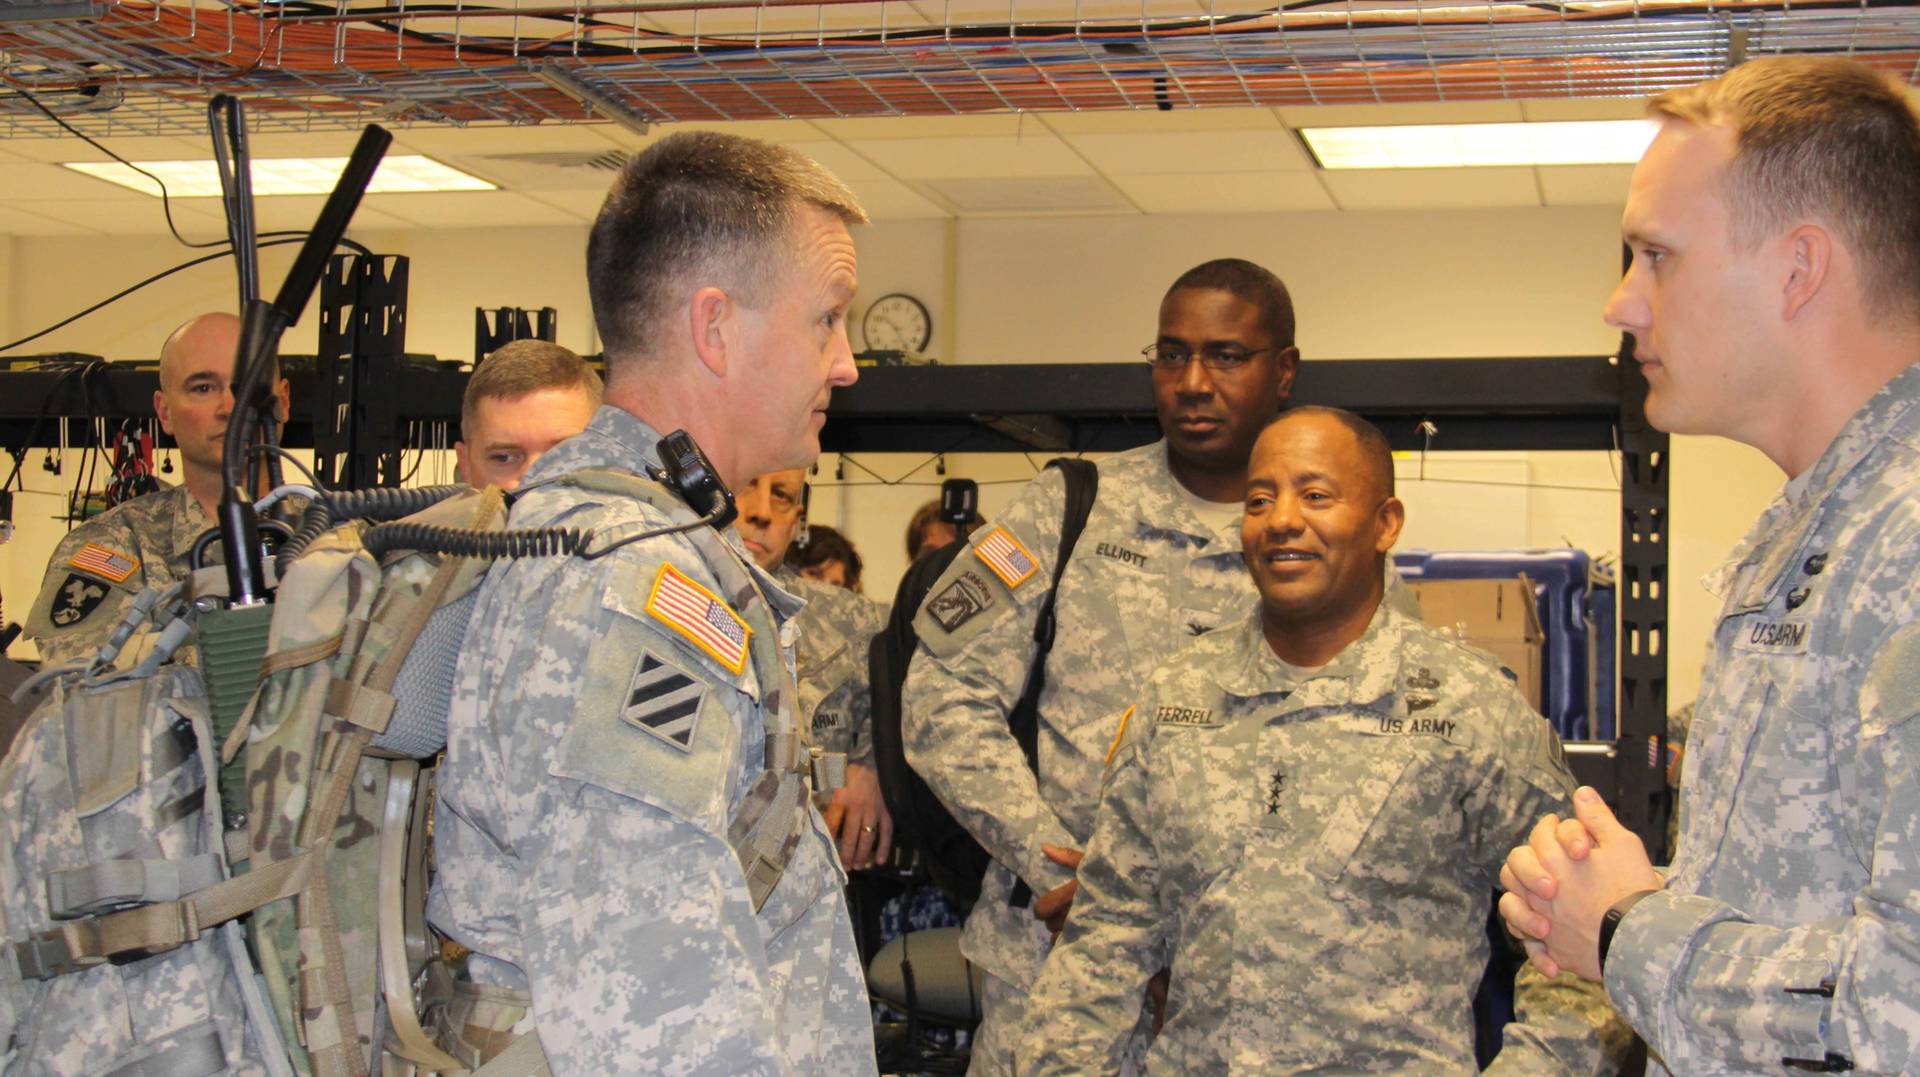 The Soldier's Network - U.S. Army: Vice Chief Encourages Network Modernization During APG Visit